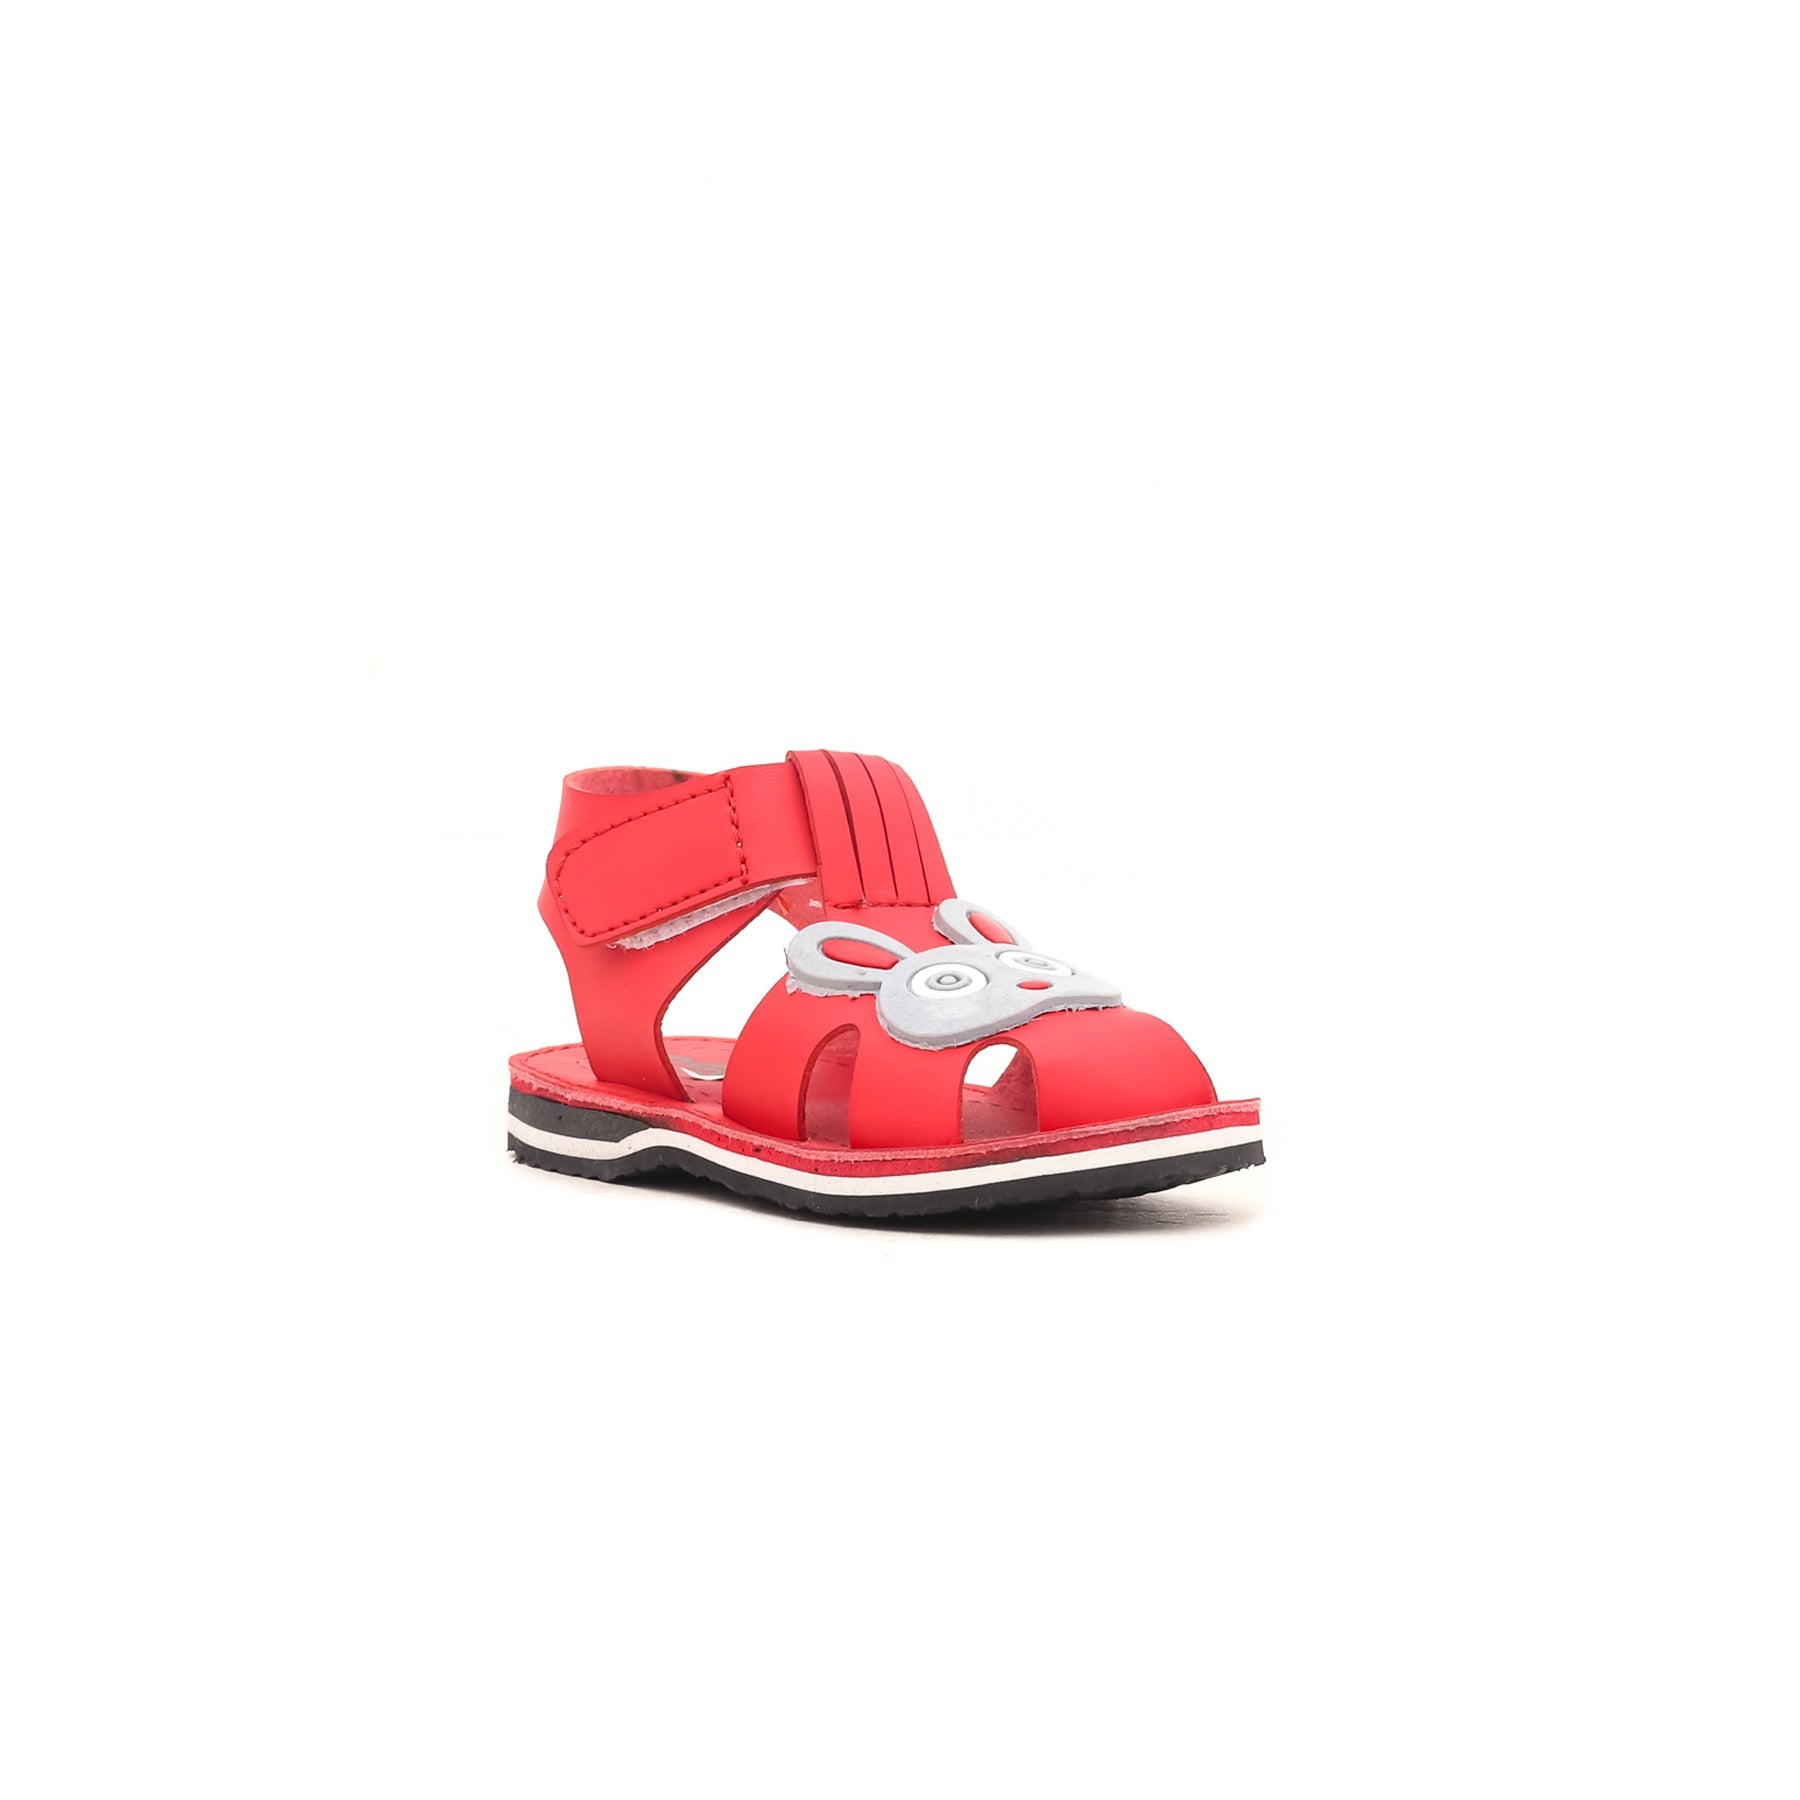 Babies Red Casual Sandal KD7624